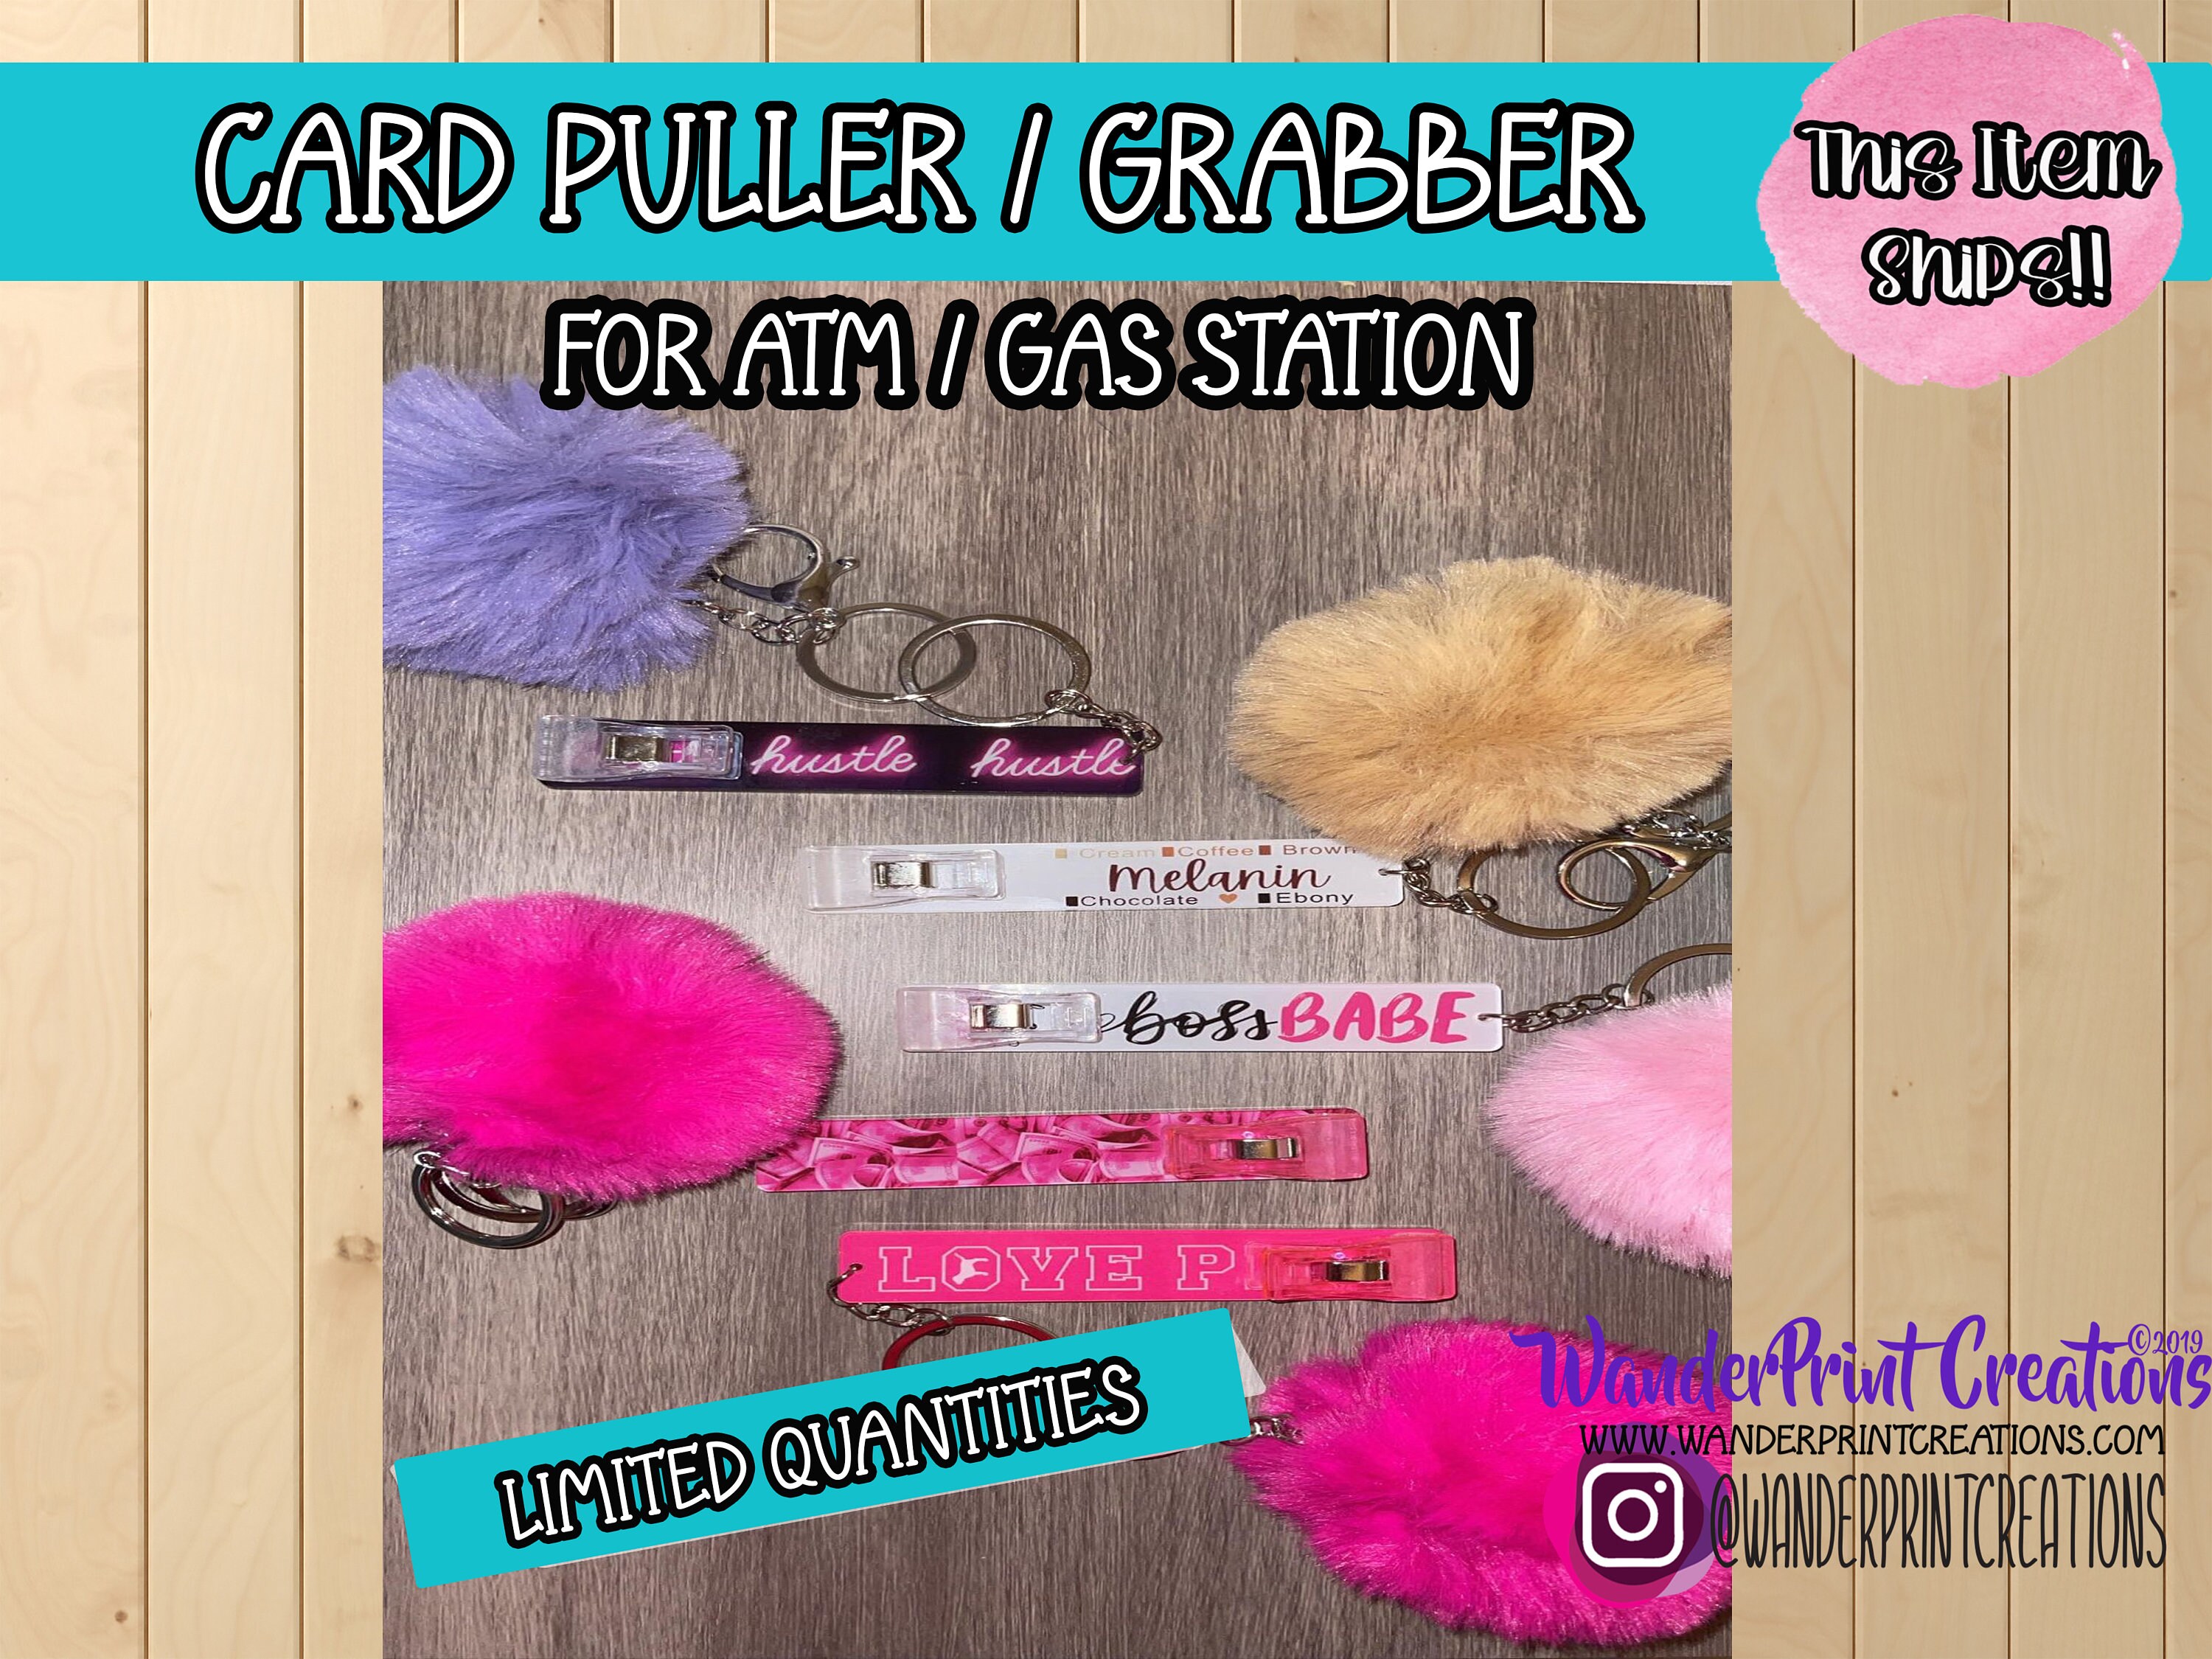 Original Swaggy Grabber Card Grabber Keychain for Long Nails